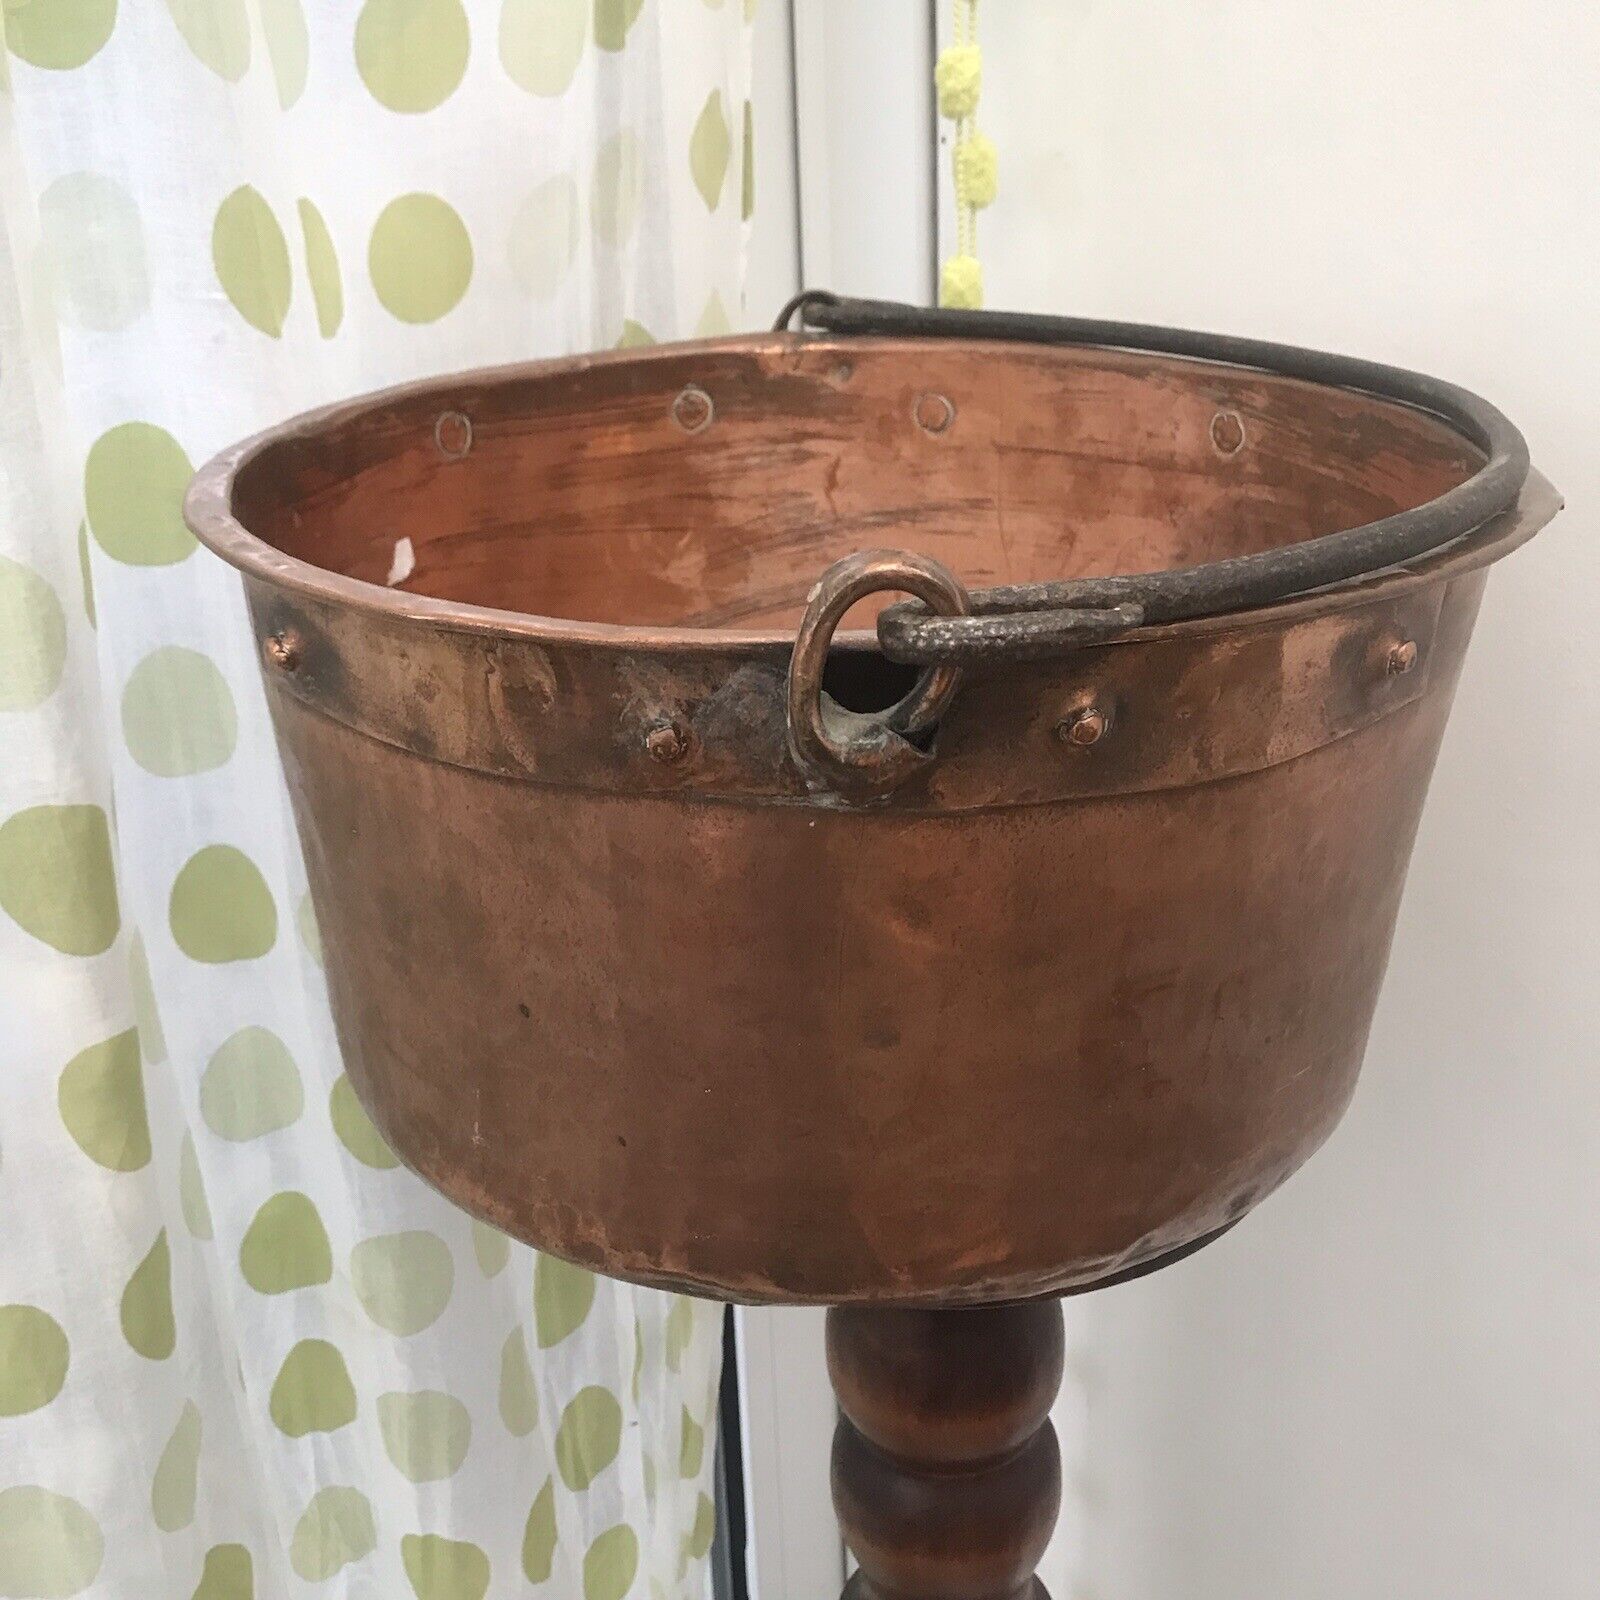 Large French Copper Cauldron Antique Dovetailed Cooking Heavy Hand Made 1800s